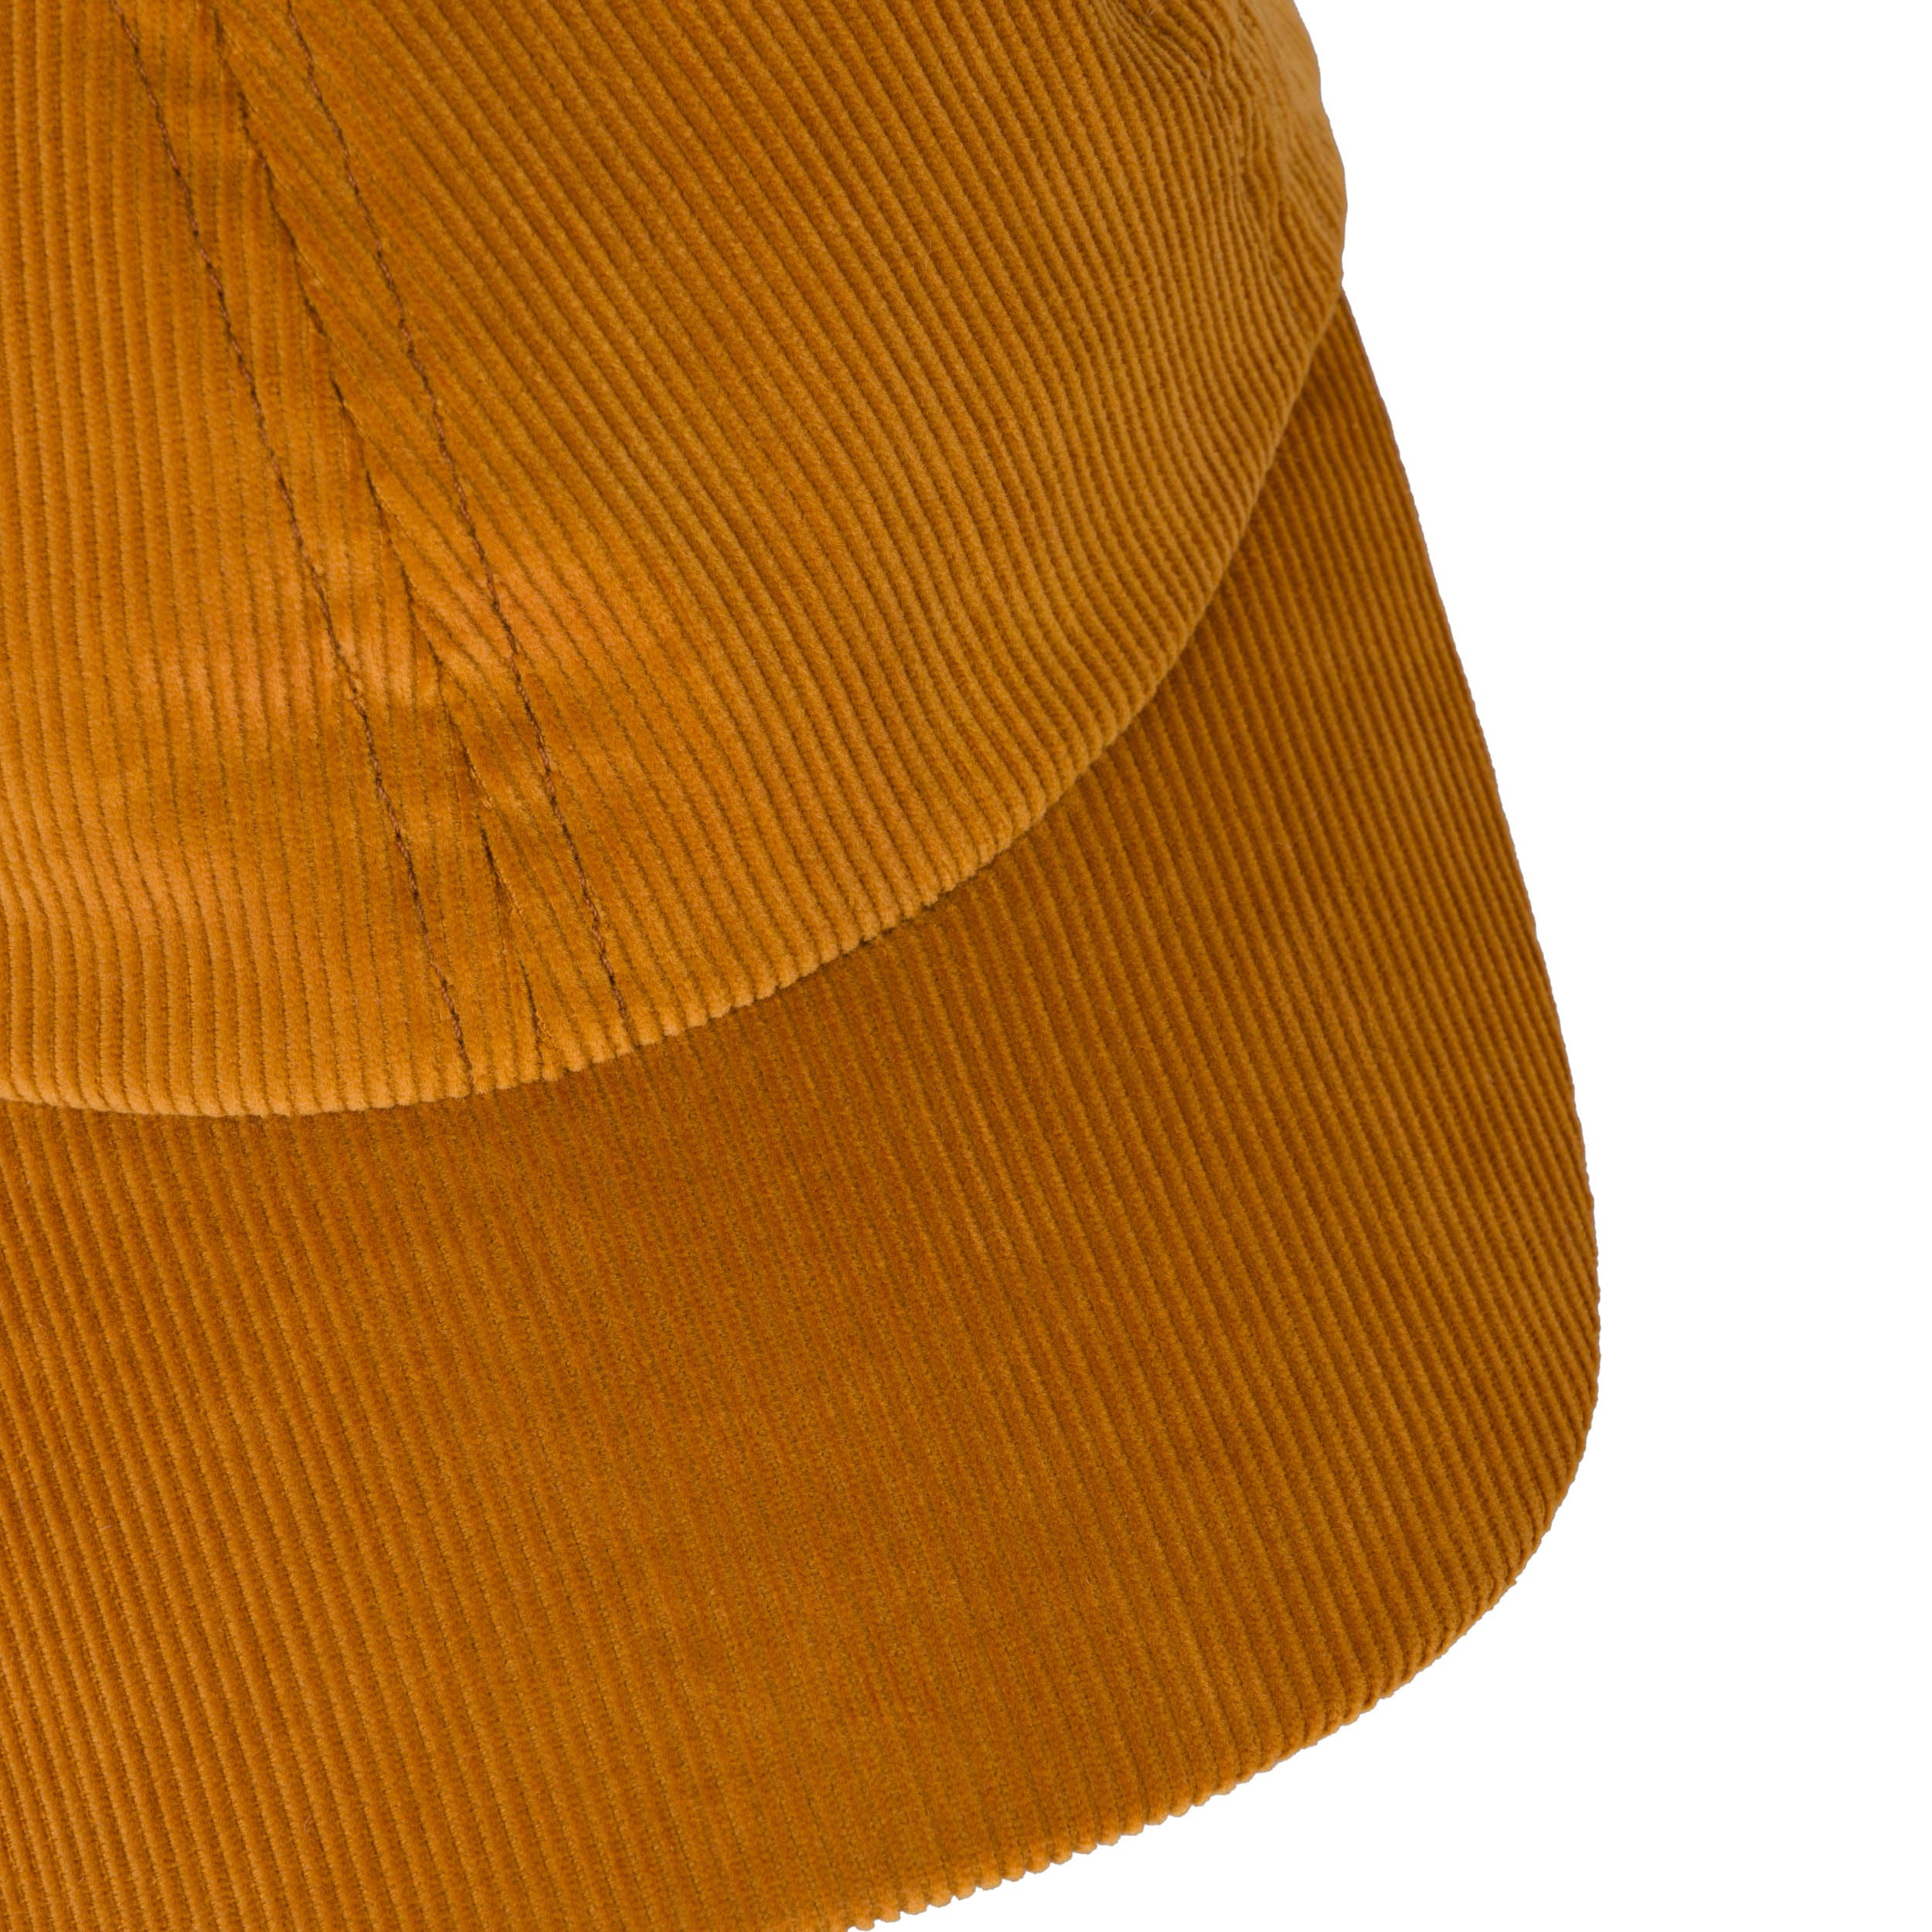 Carrier Company Corduroy Baseball Cap in Gold